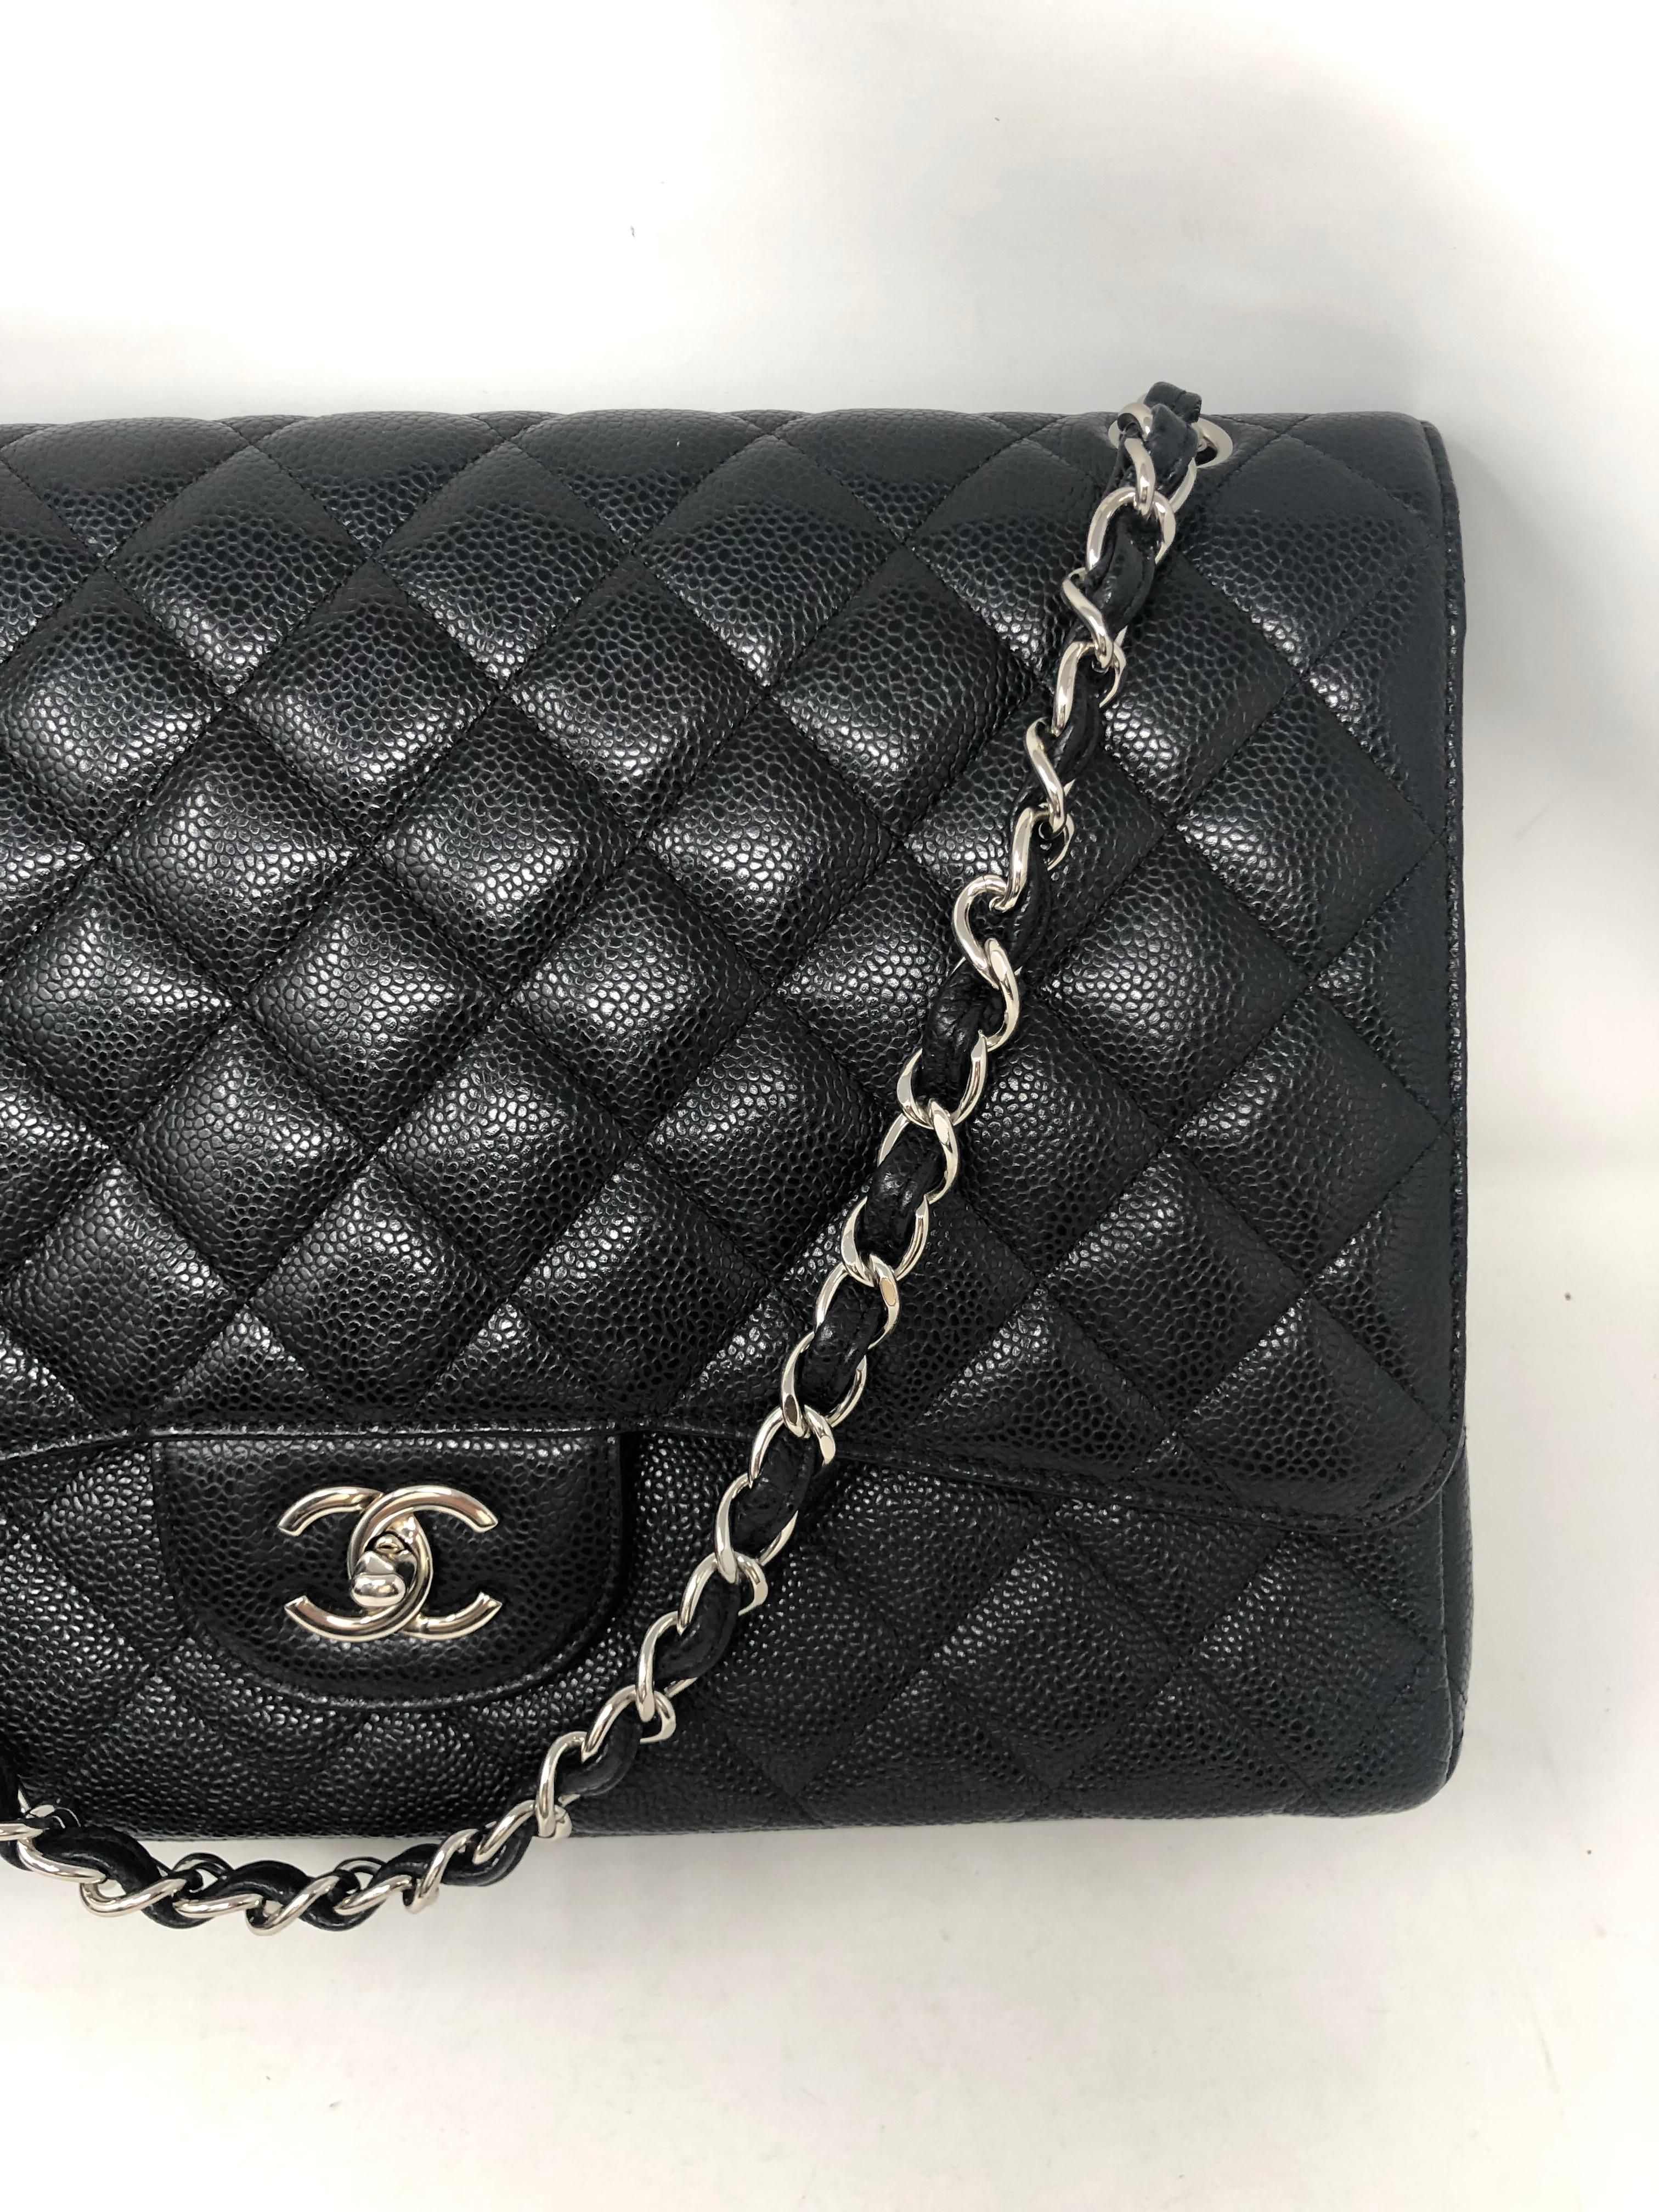 Chanel Black Caviar Leather Maxi Double Flap Bag. Silver hardware. Mint condition. Like new. 13